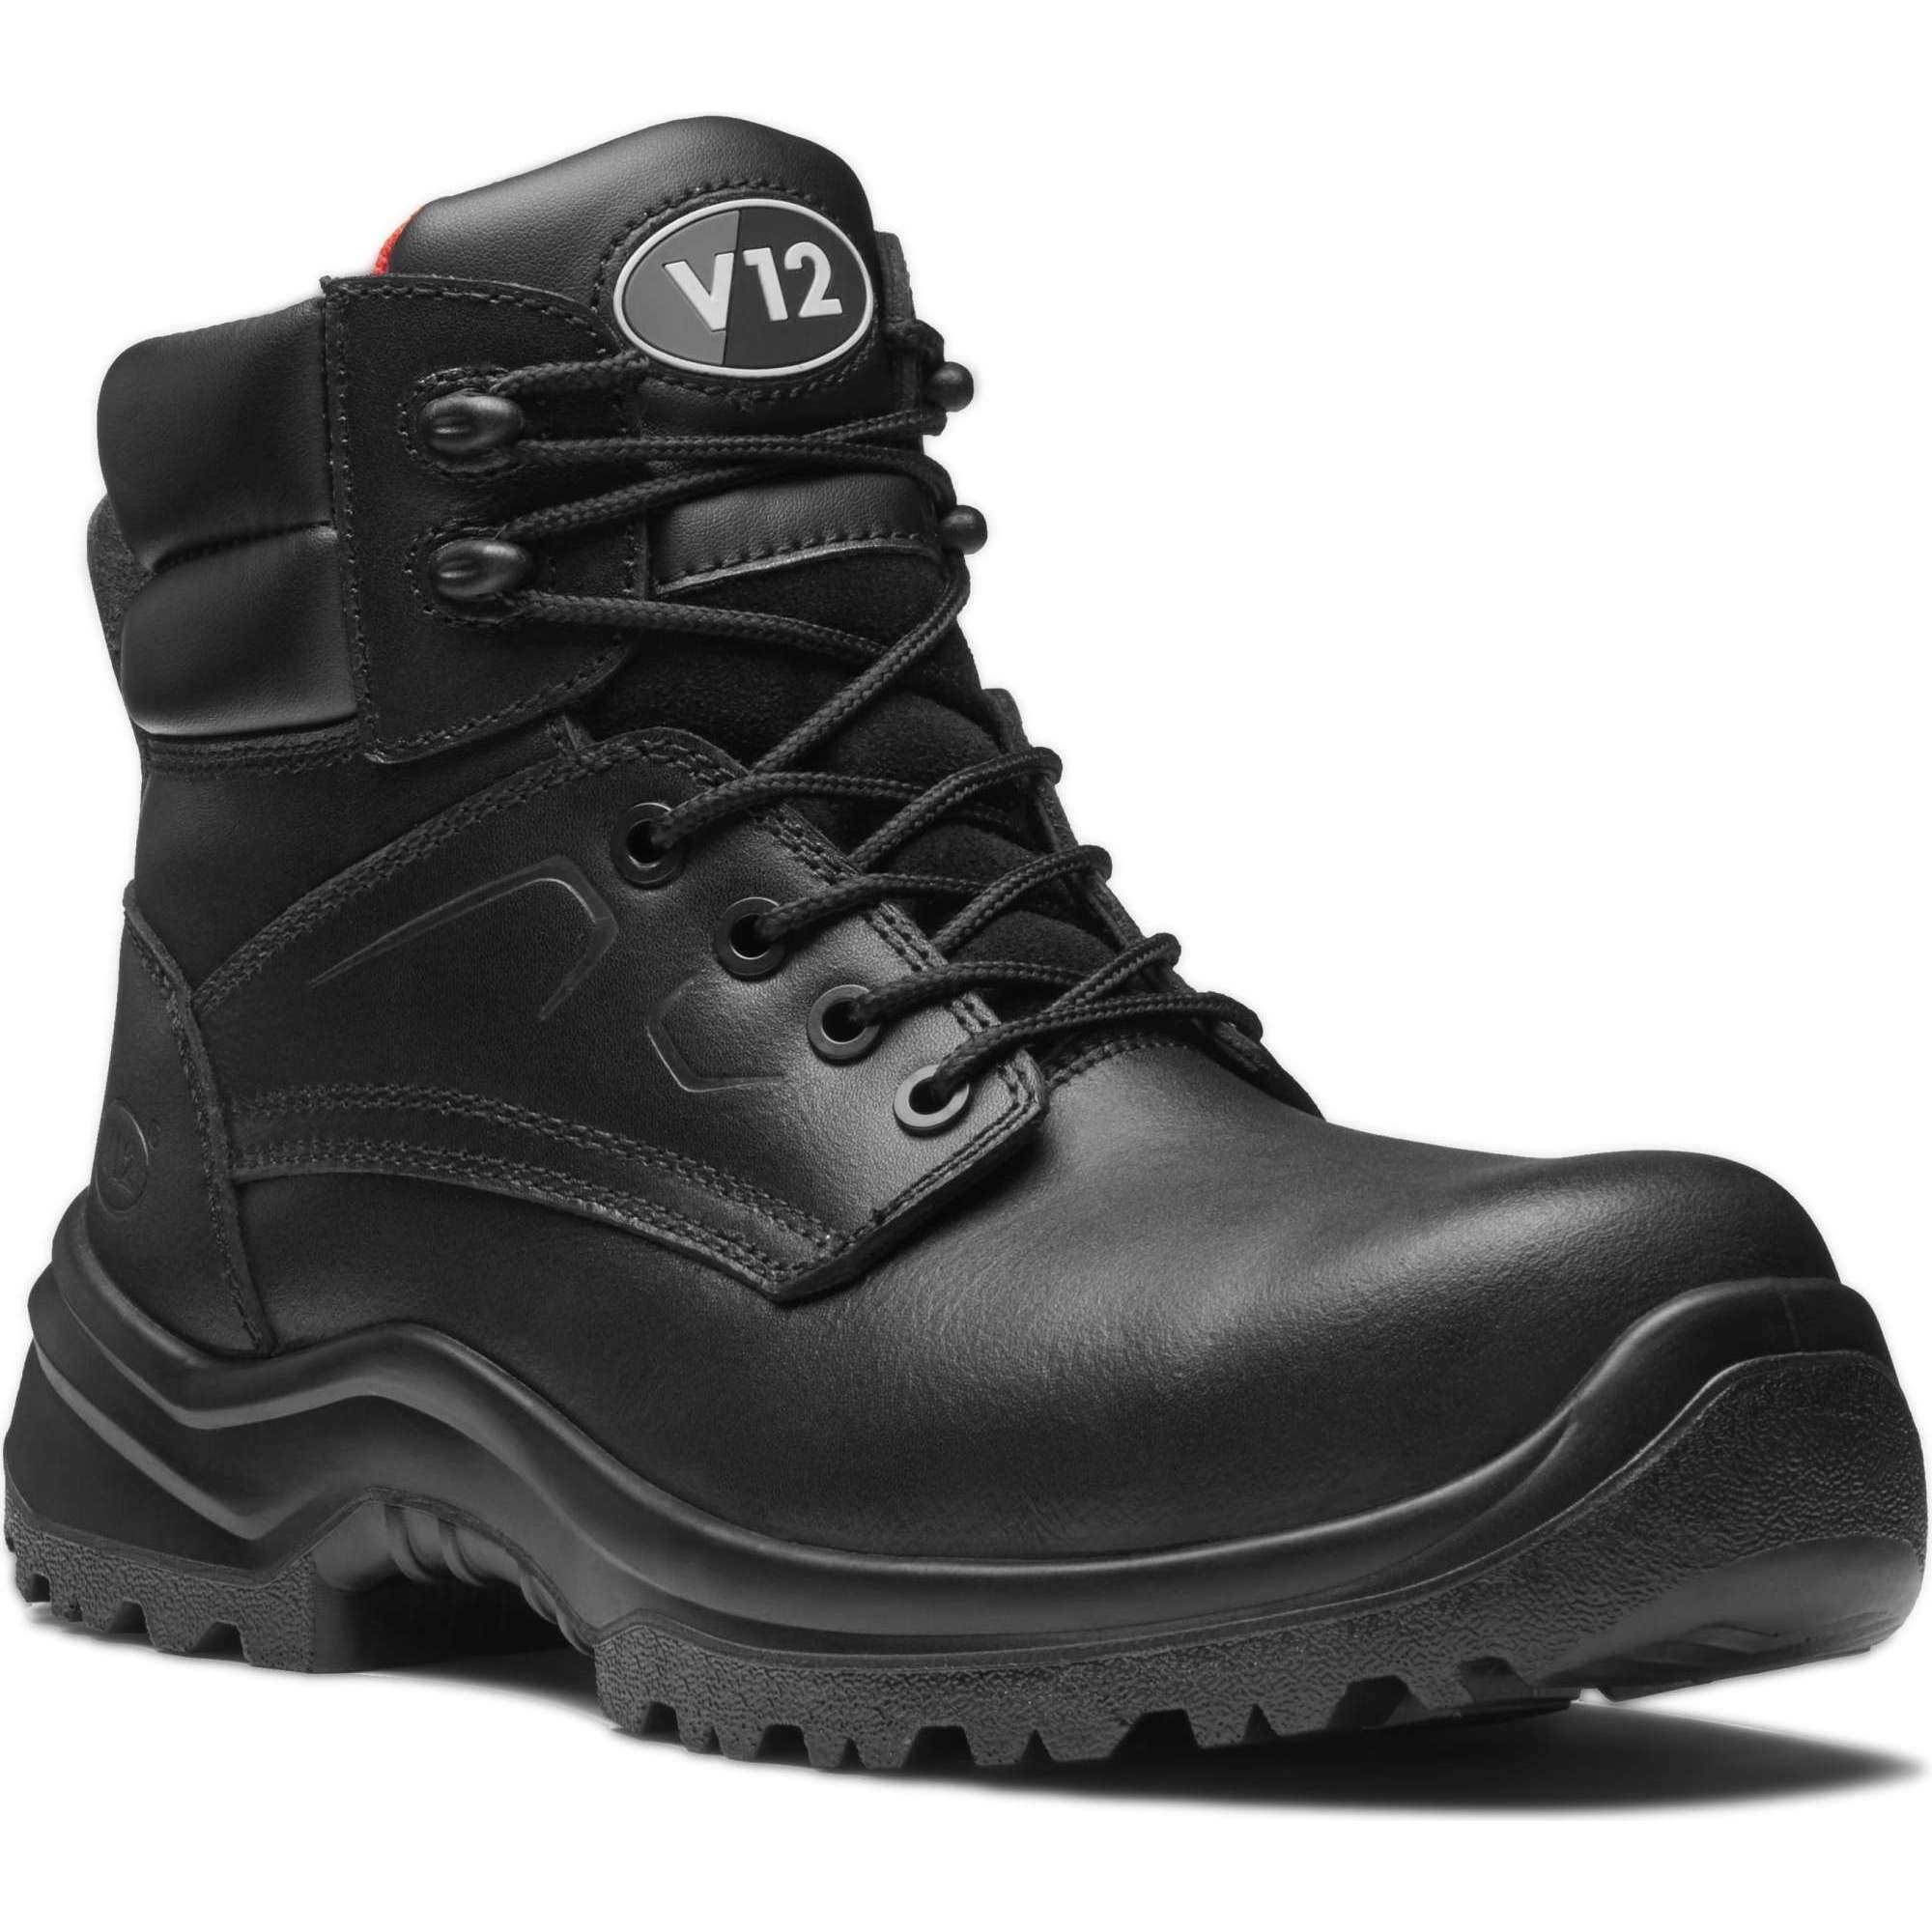 V12 Otter STS S3 Safety Boots